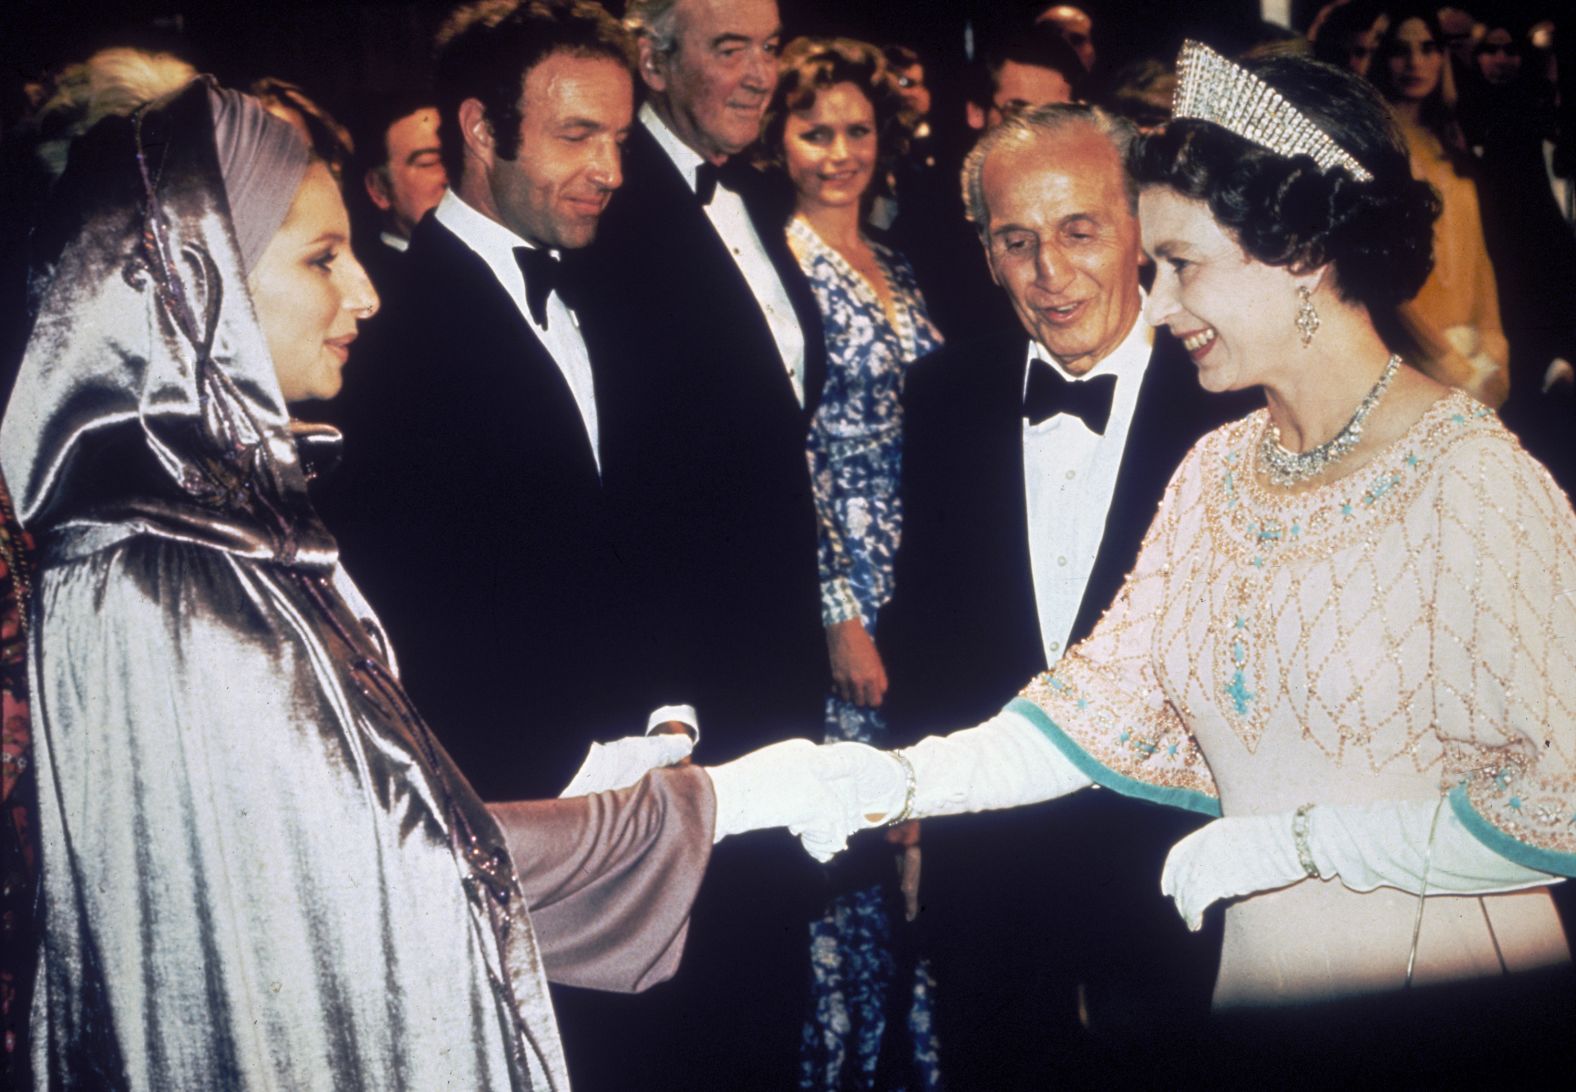 Britain's Queen Elizabeth II greets Streisand at the film premiere of "Funny Lady," the 1975 follow-up to "Funny Girl."